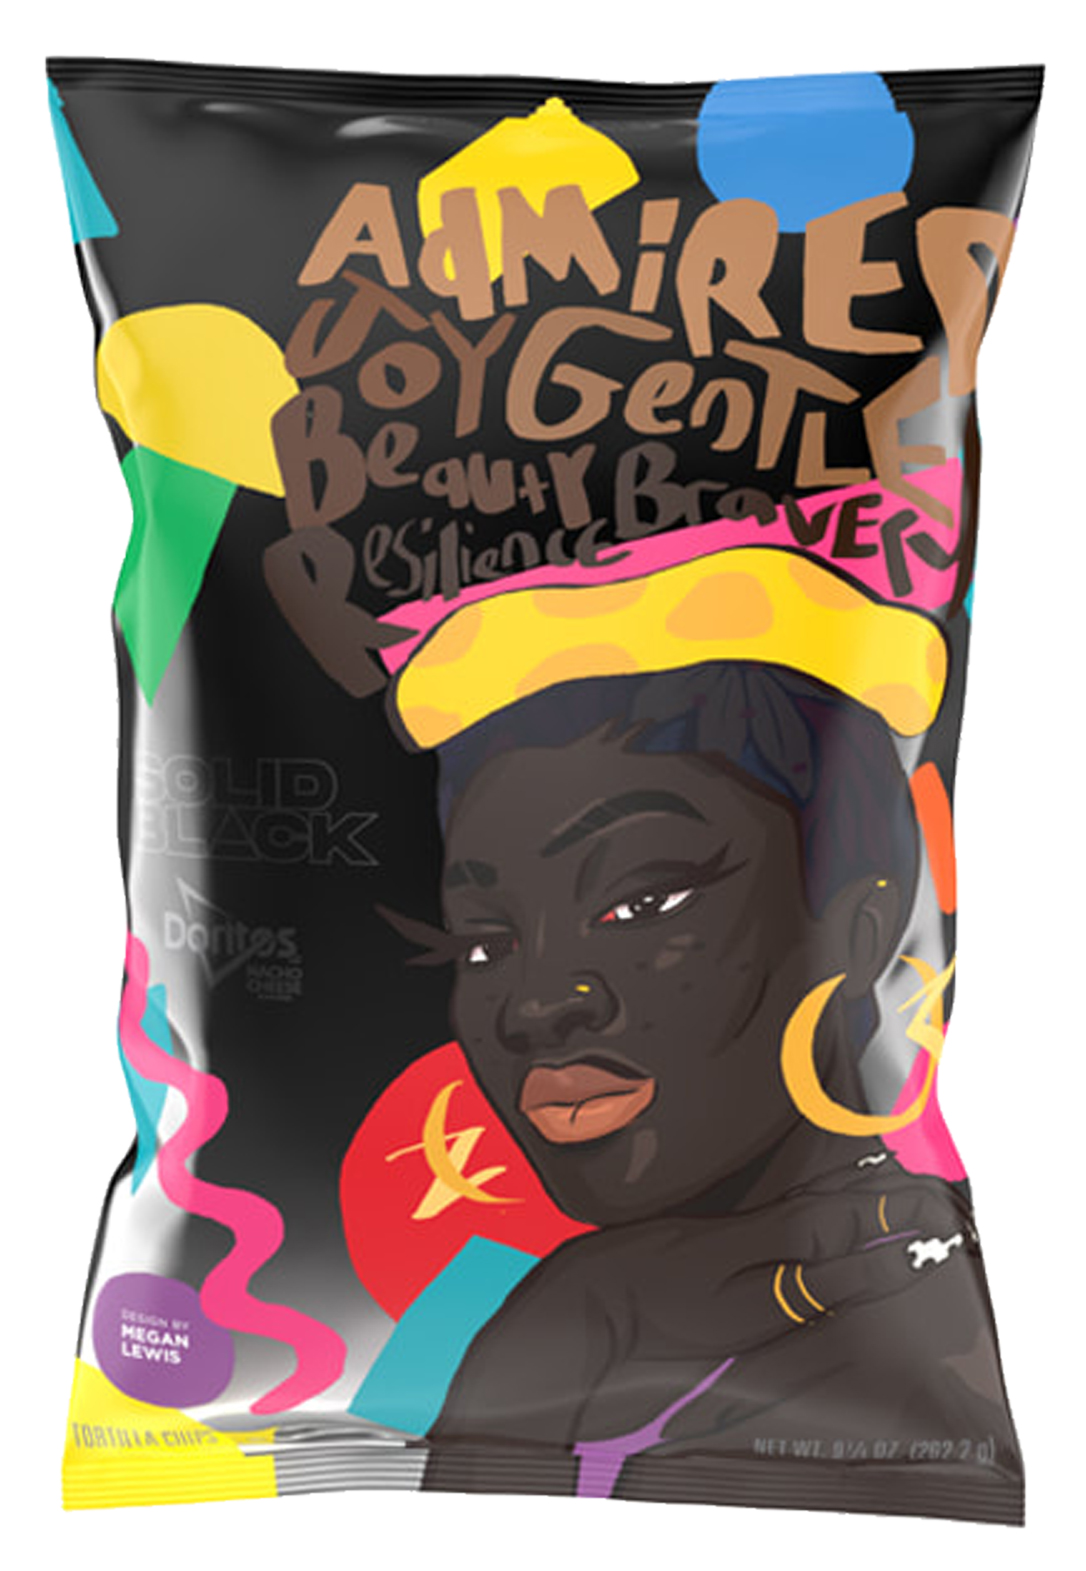 In Megan Lewis's Doritos Solid Black Challenge designs, striking portraits emerge on a black canvas adorned with vibrant Memphis designs. The first captures an African American woman with large gold earrings, skin-toned words enveloping her - "Admired," "Joy," "Gentle," "Beauty," "Brave," and "Resilient."